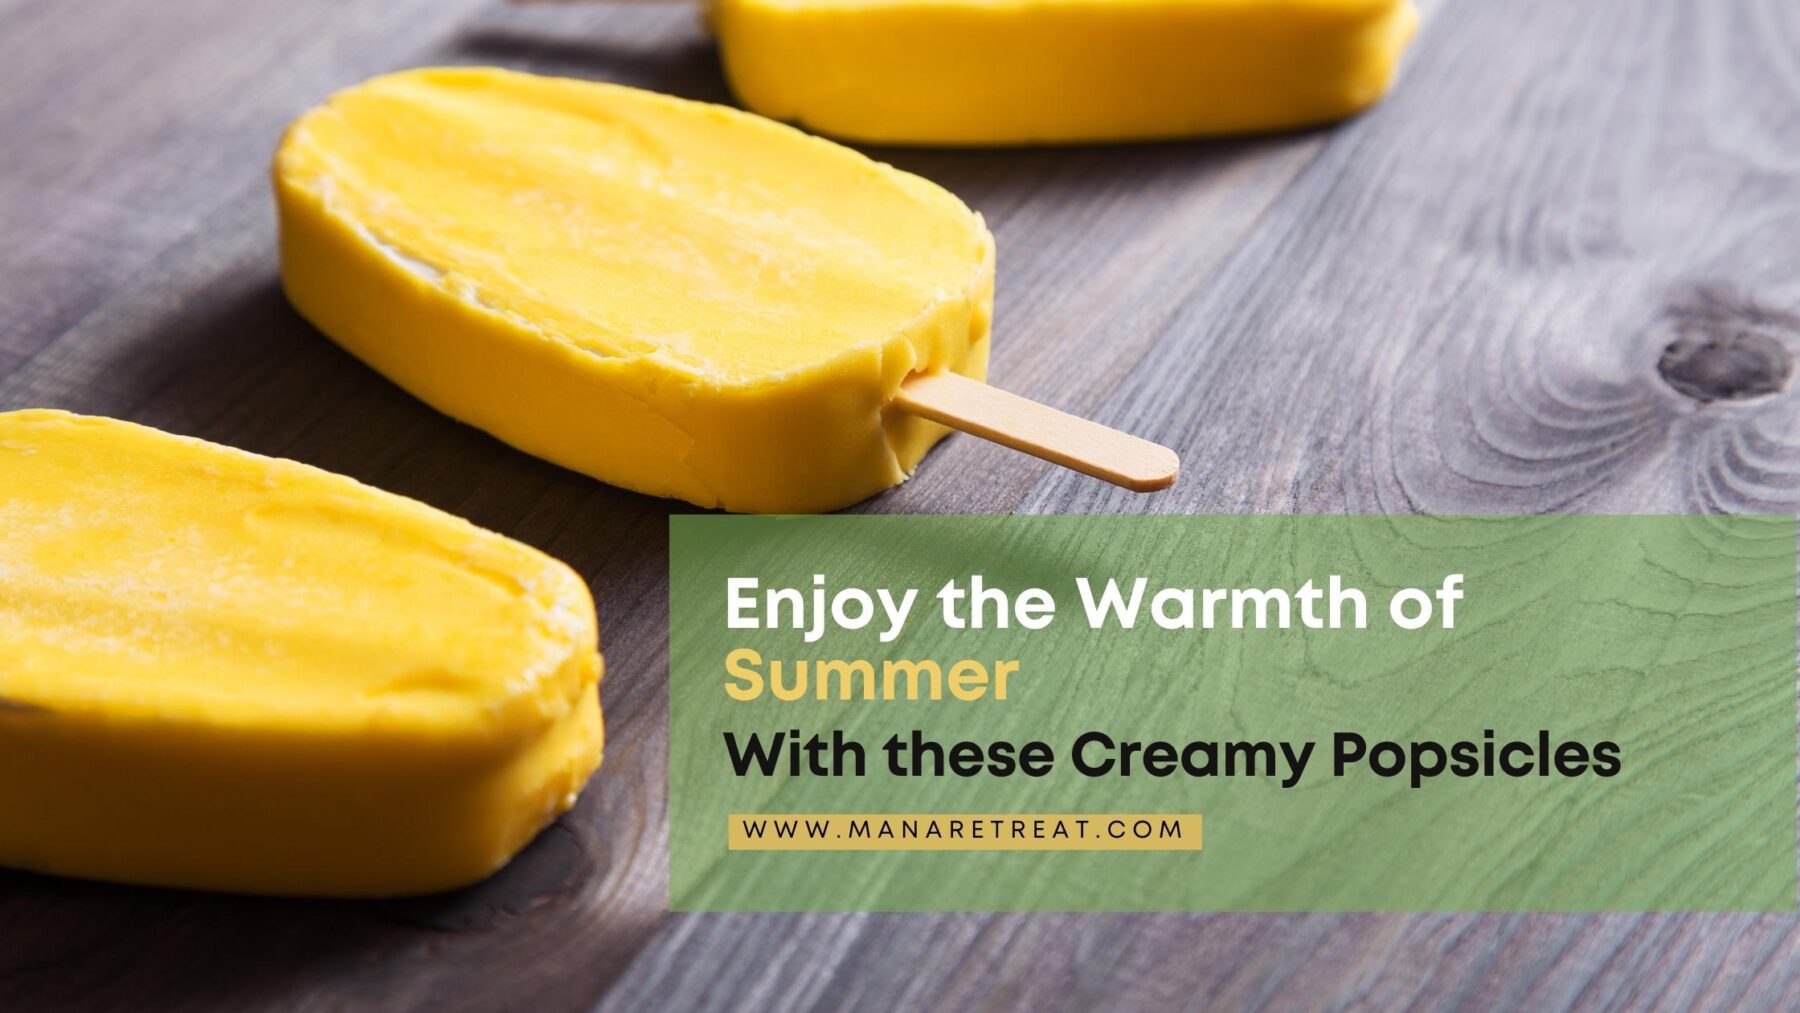 Enjoy the Warmth of Summer with These Creamy Popsicles